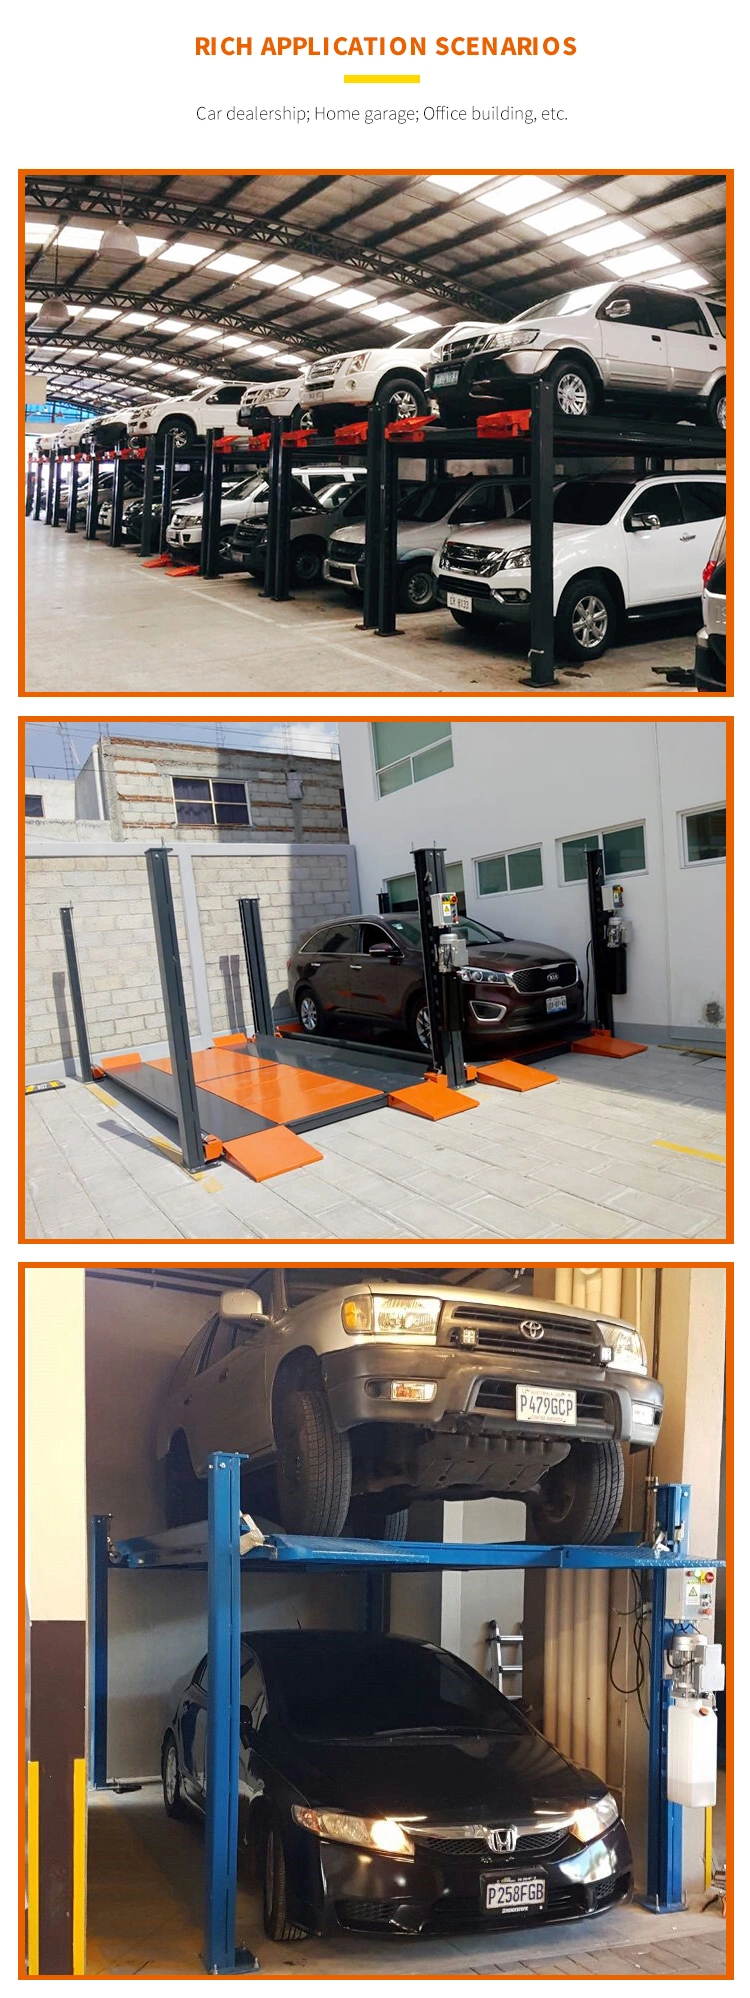 Four Post Car Parking Lift for Home Garage